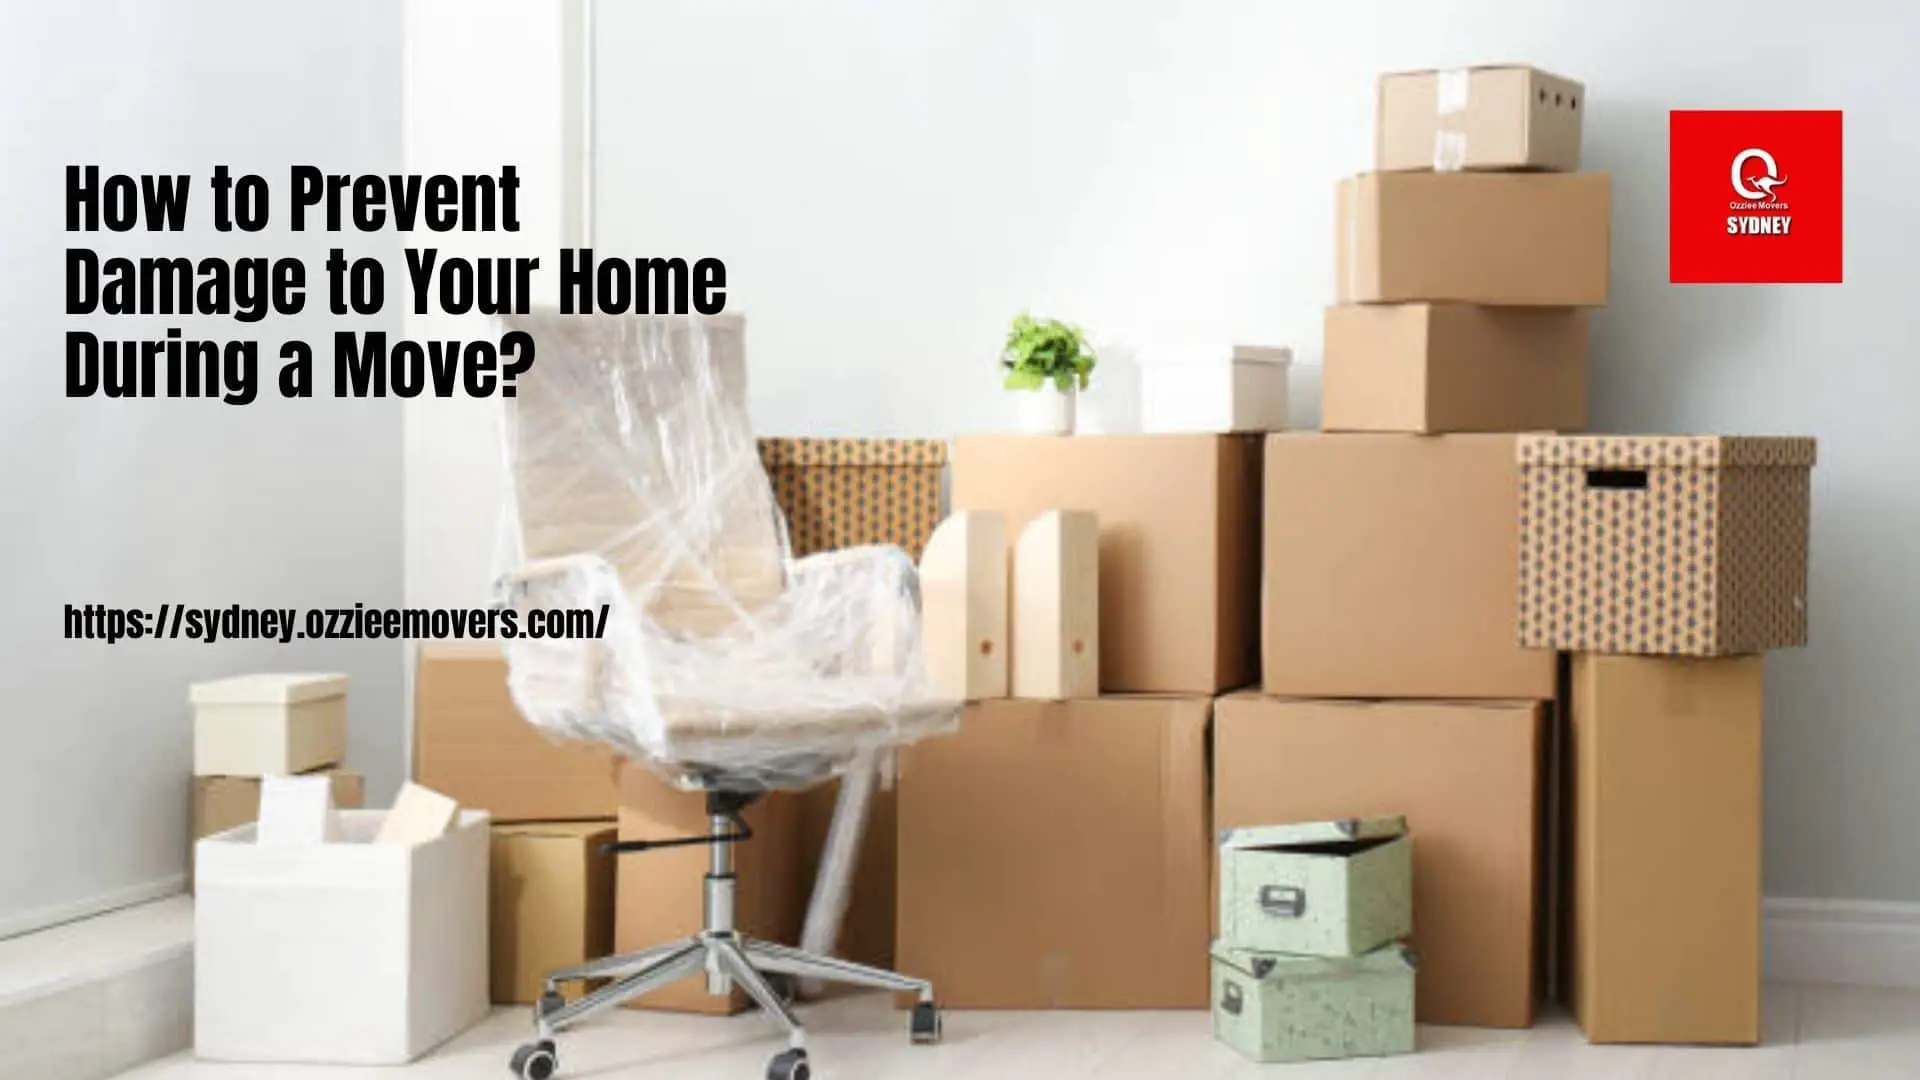 How to Prevent Damage to Your Home During a Move-4b19b3b6